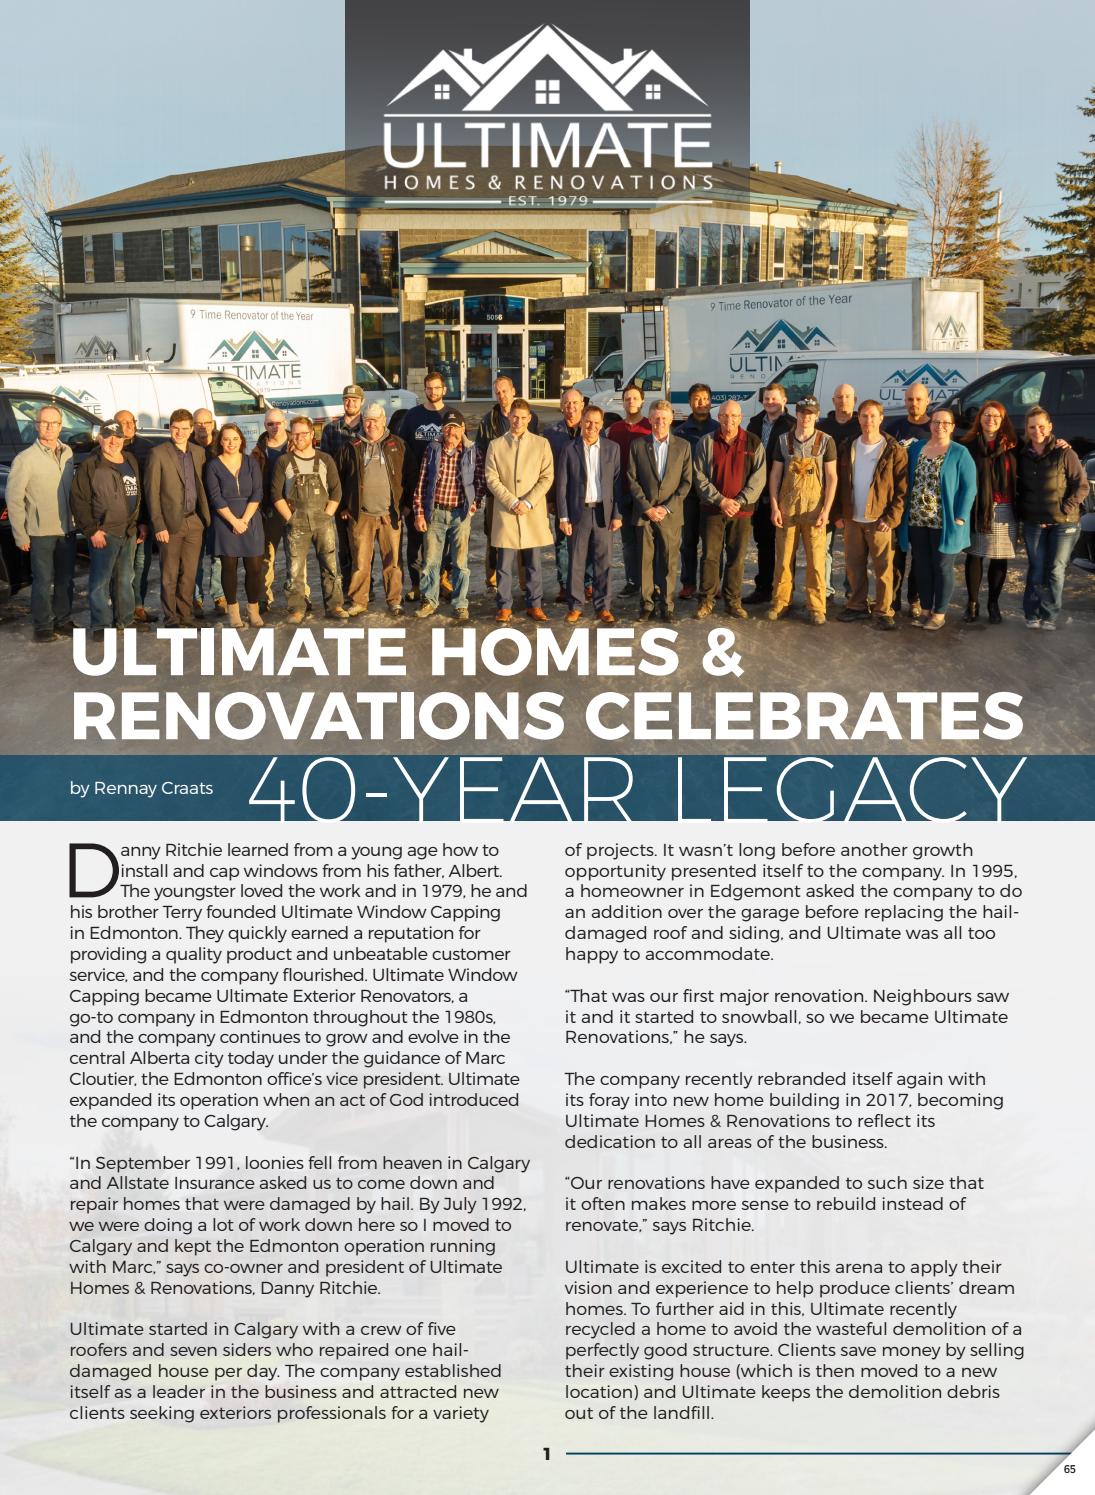 Business in Calgary Magazine - Business Profile for Ultimate Homes & Renovations